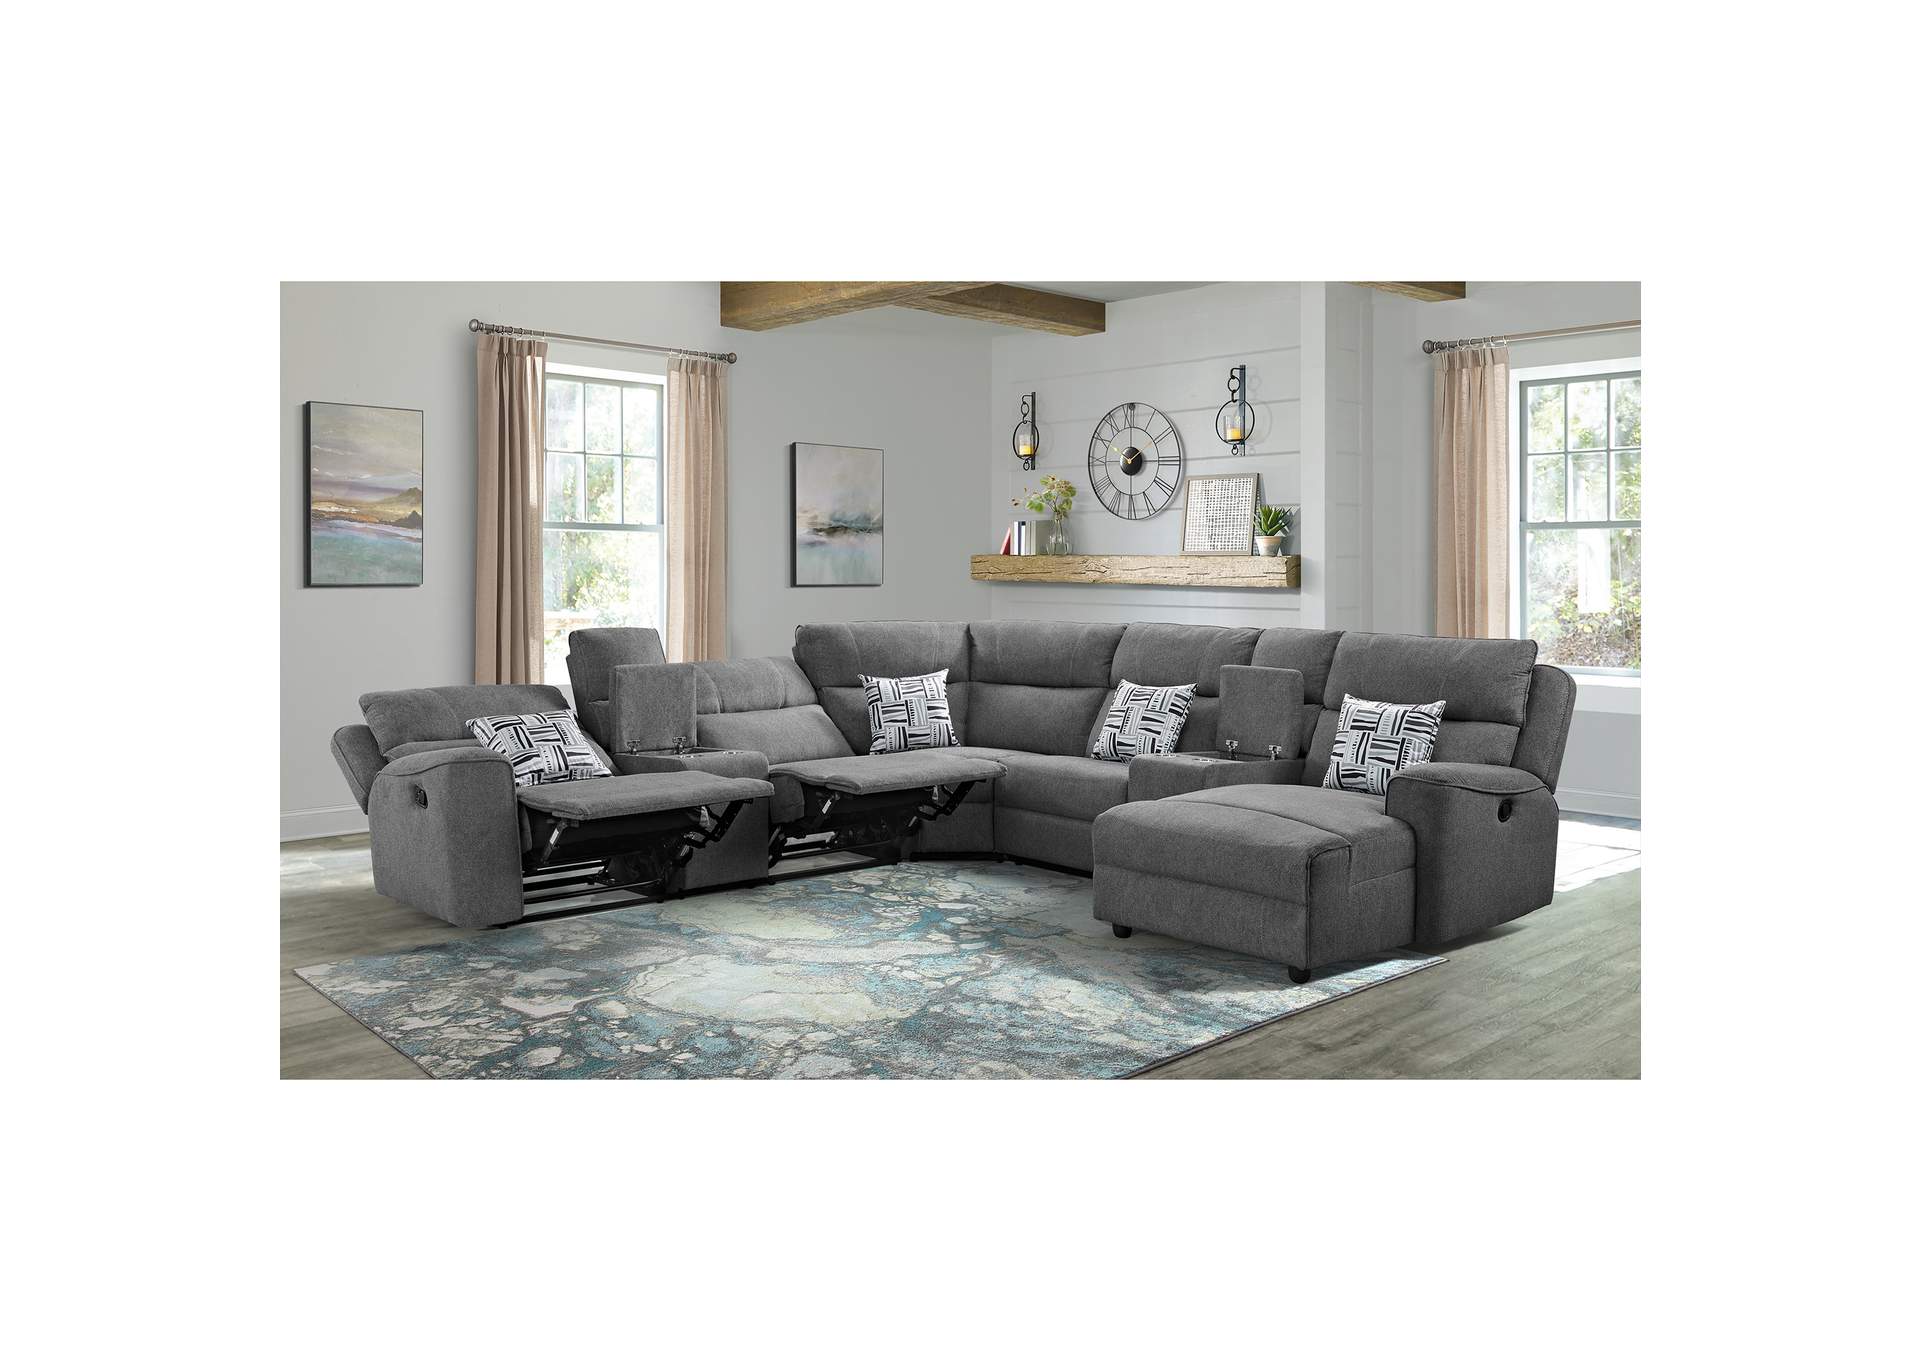 Connery Sectional Sectional In Pewter,Elements